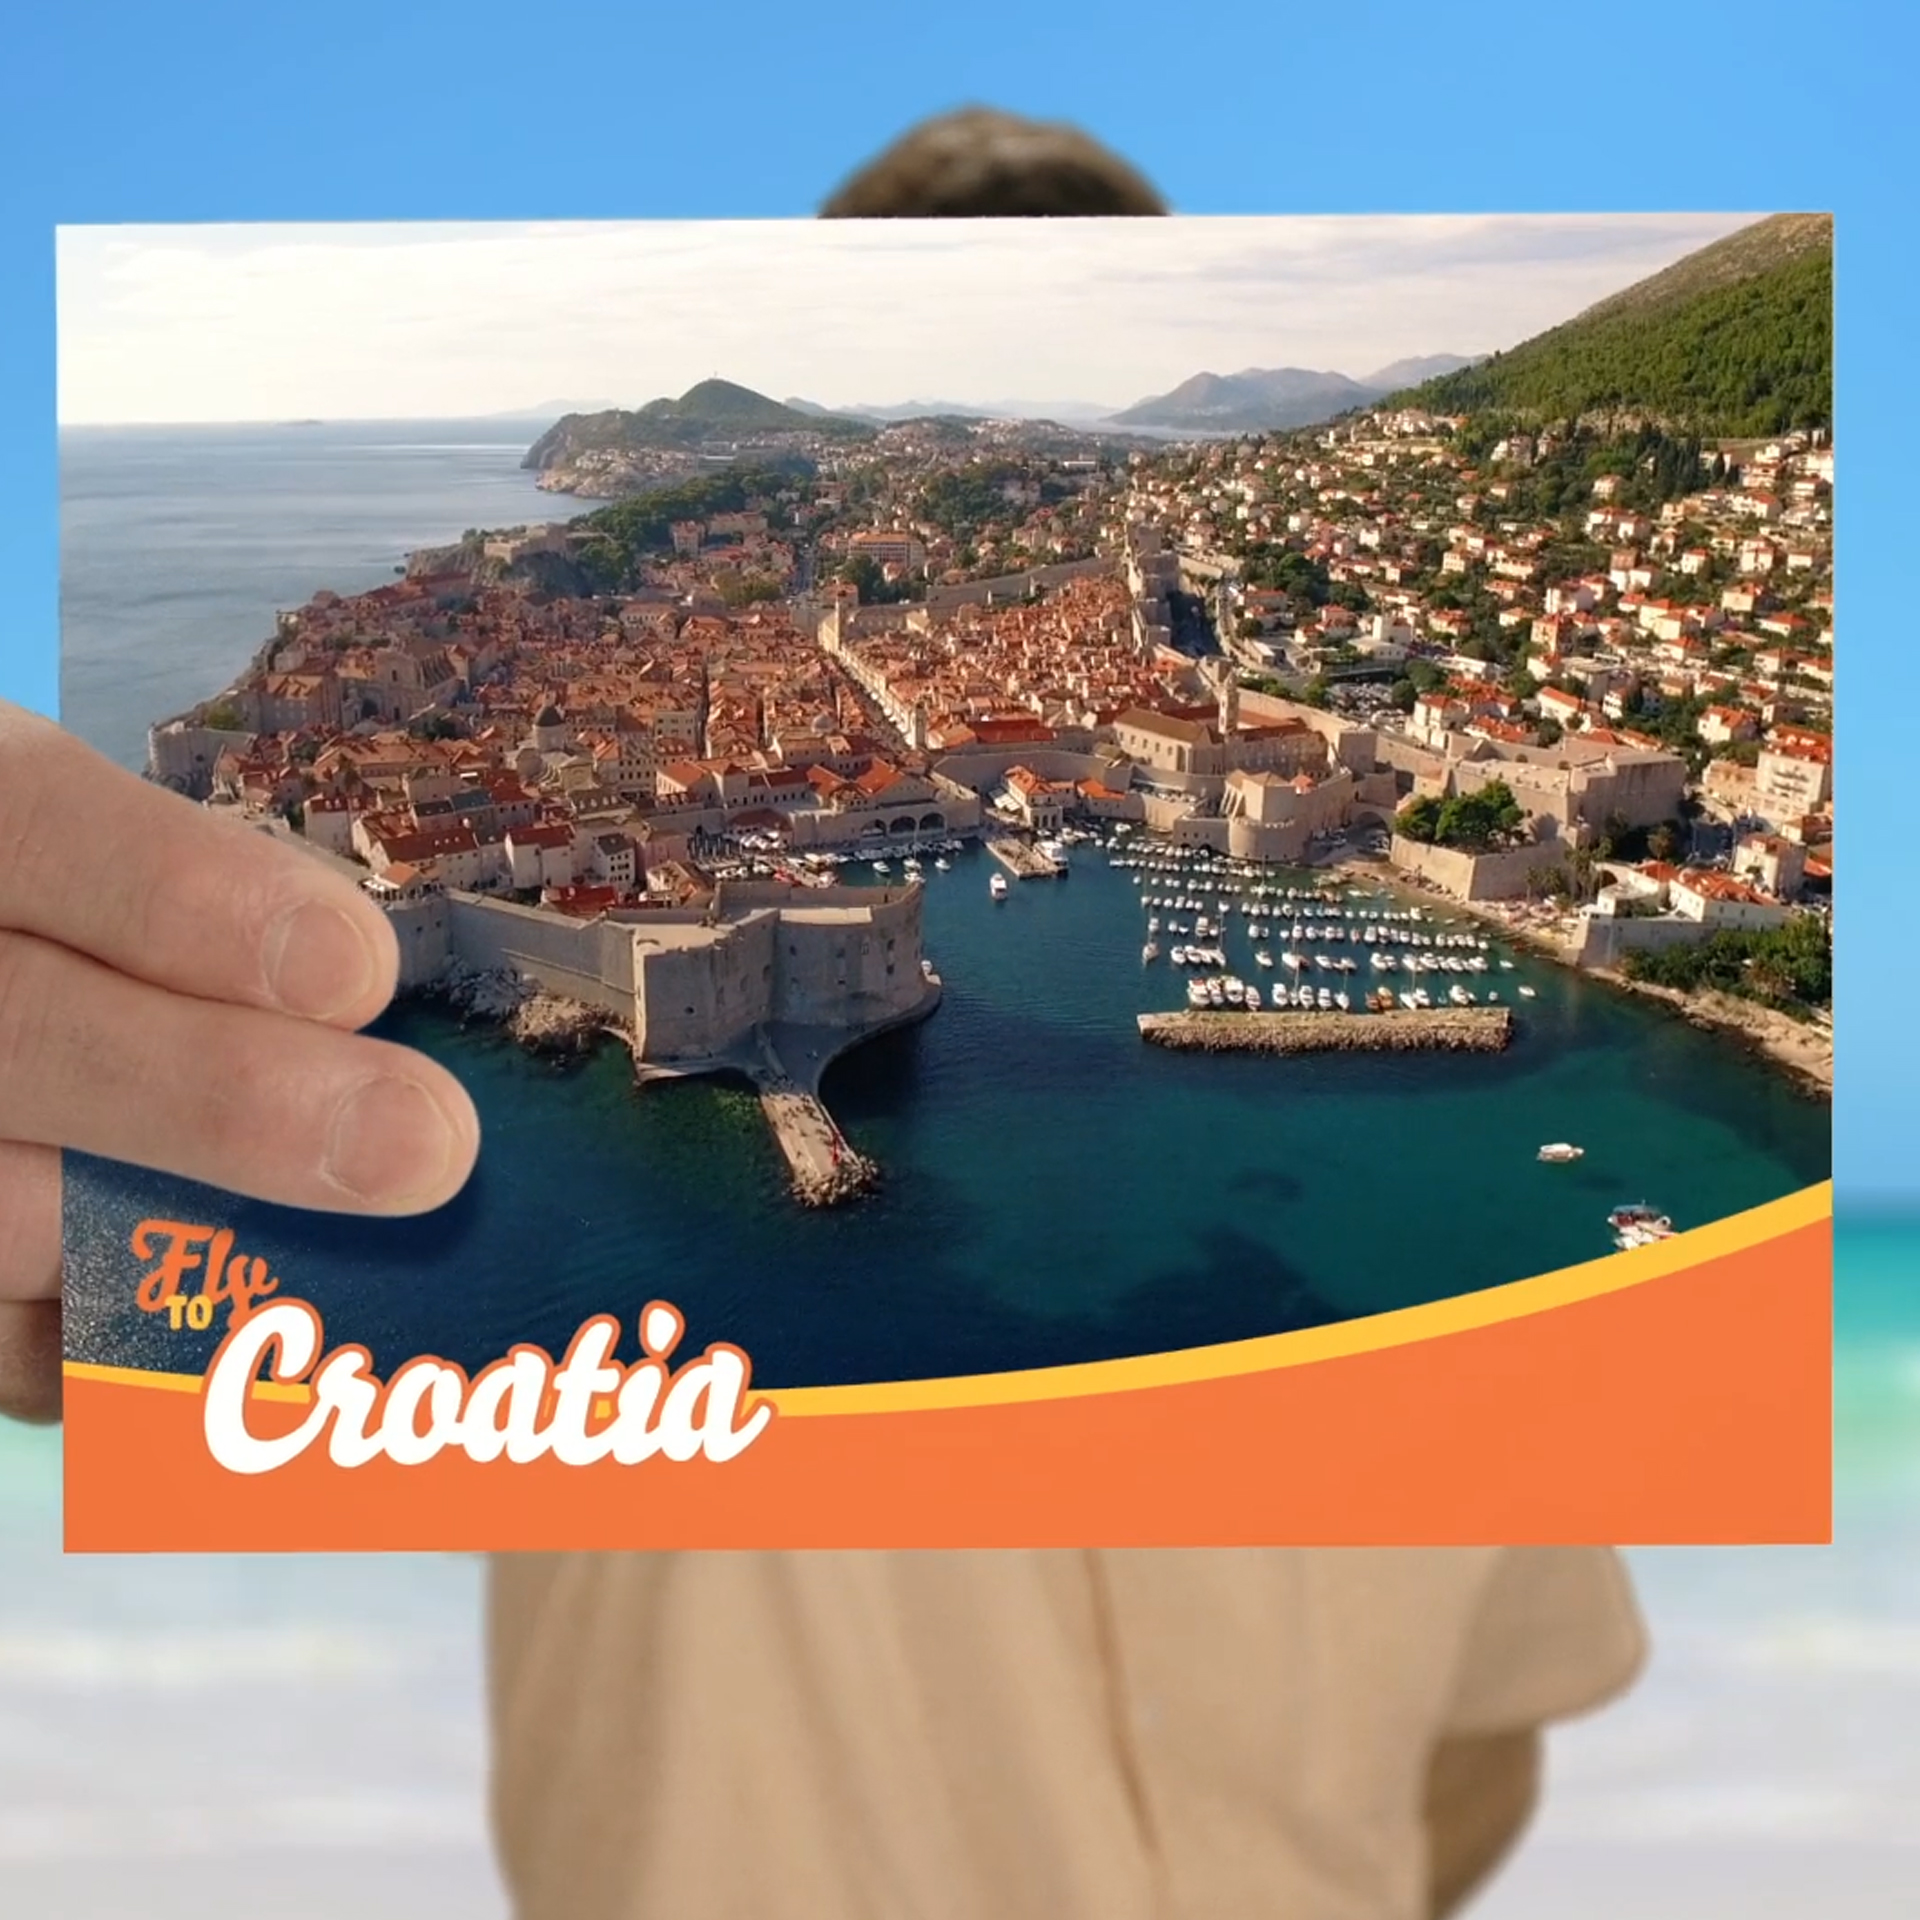 Dec hold up postcard of Croatian town